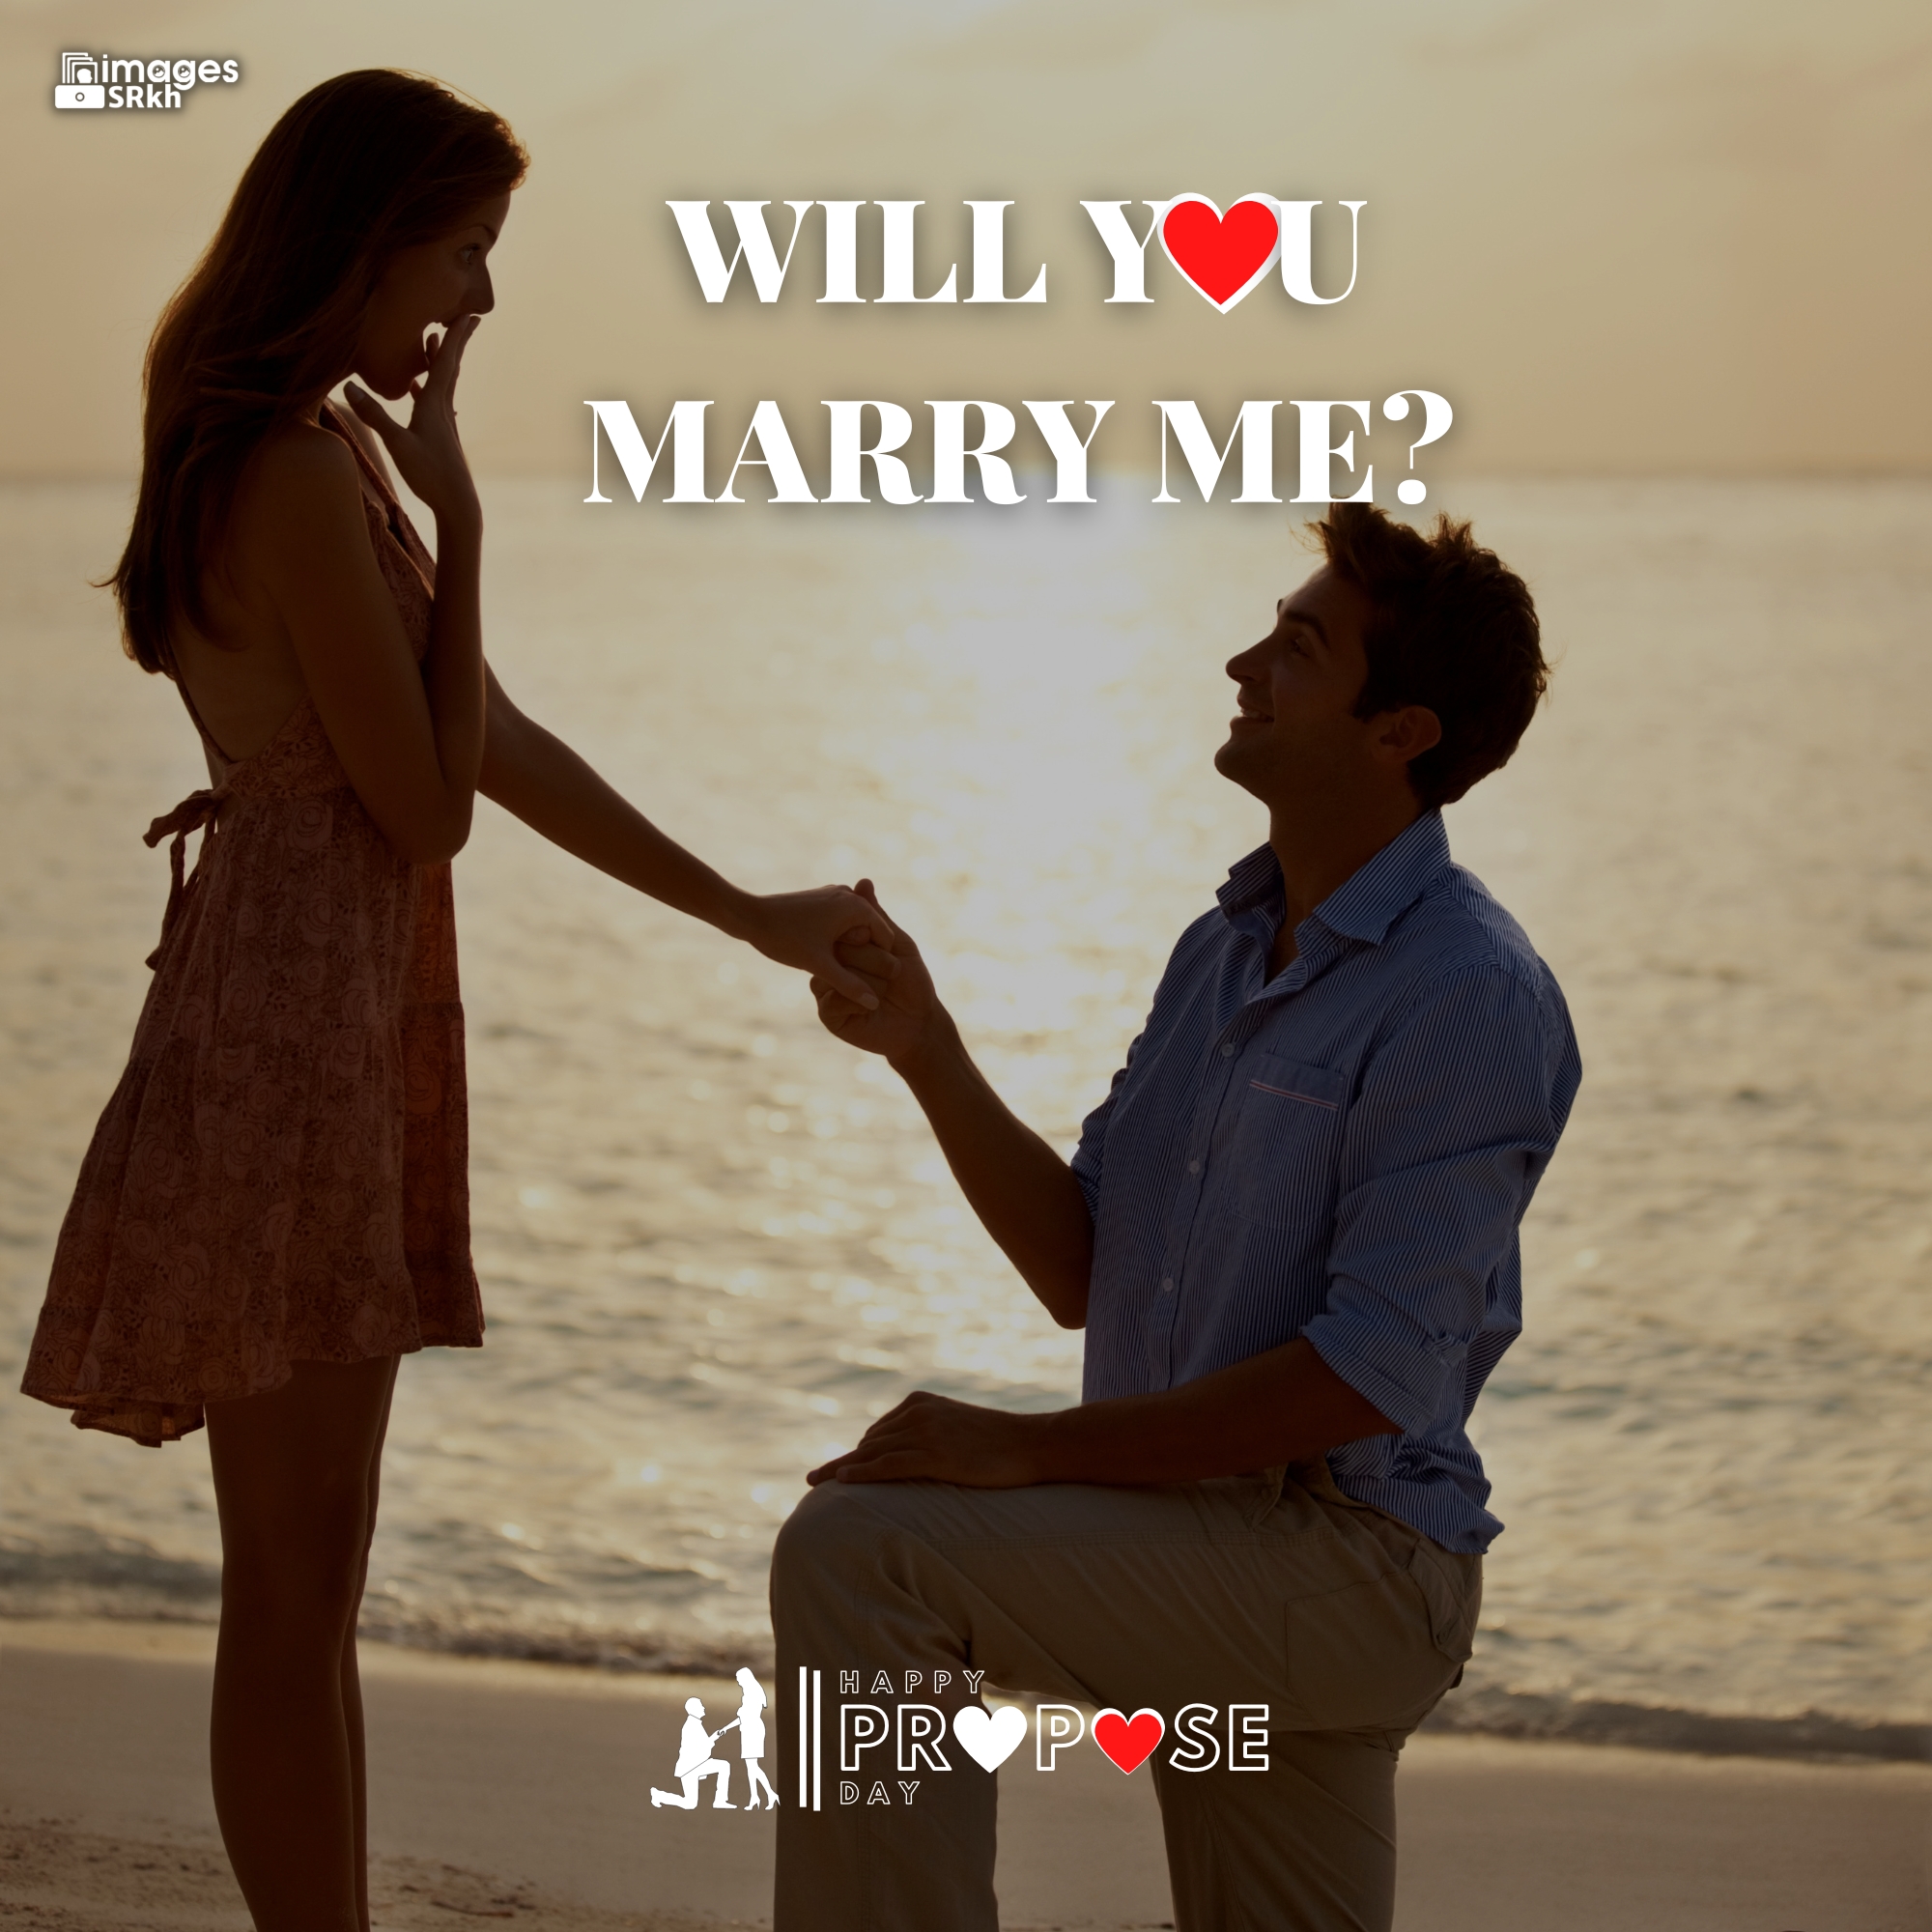 Propose Day Images | 257 | Will You MARRY ME